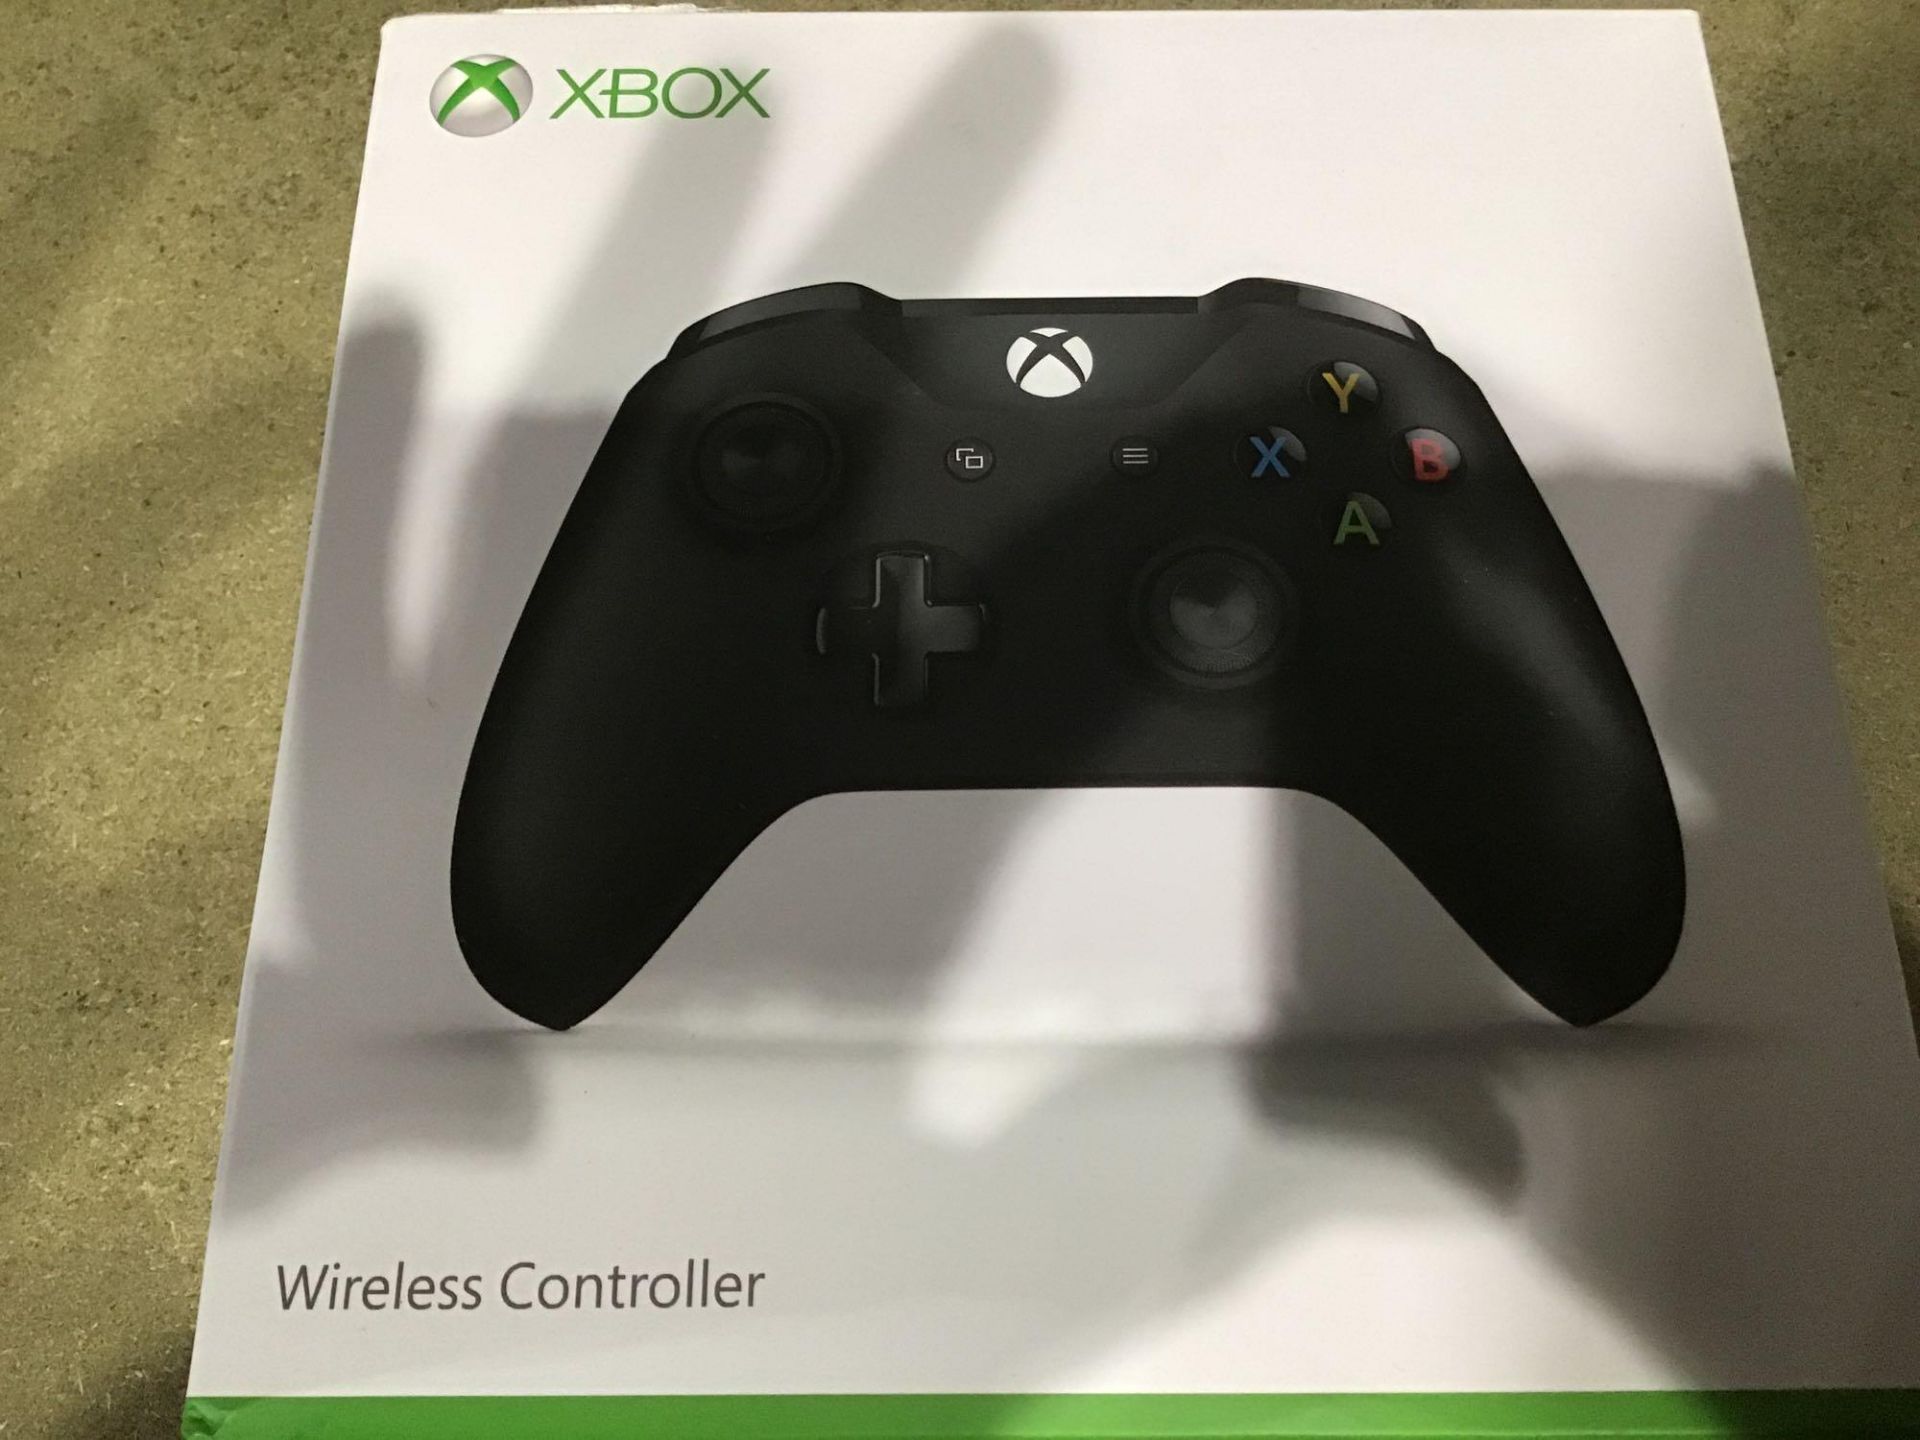 Official Xbox One Wireless Controller - Black 619/9582 £49.99 RRP - Image 3 of 4